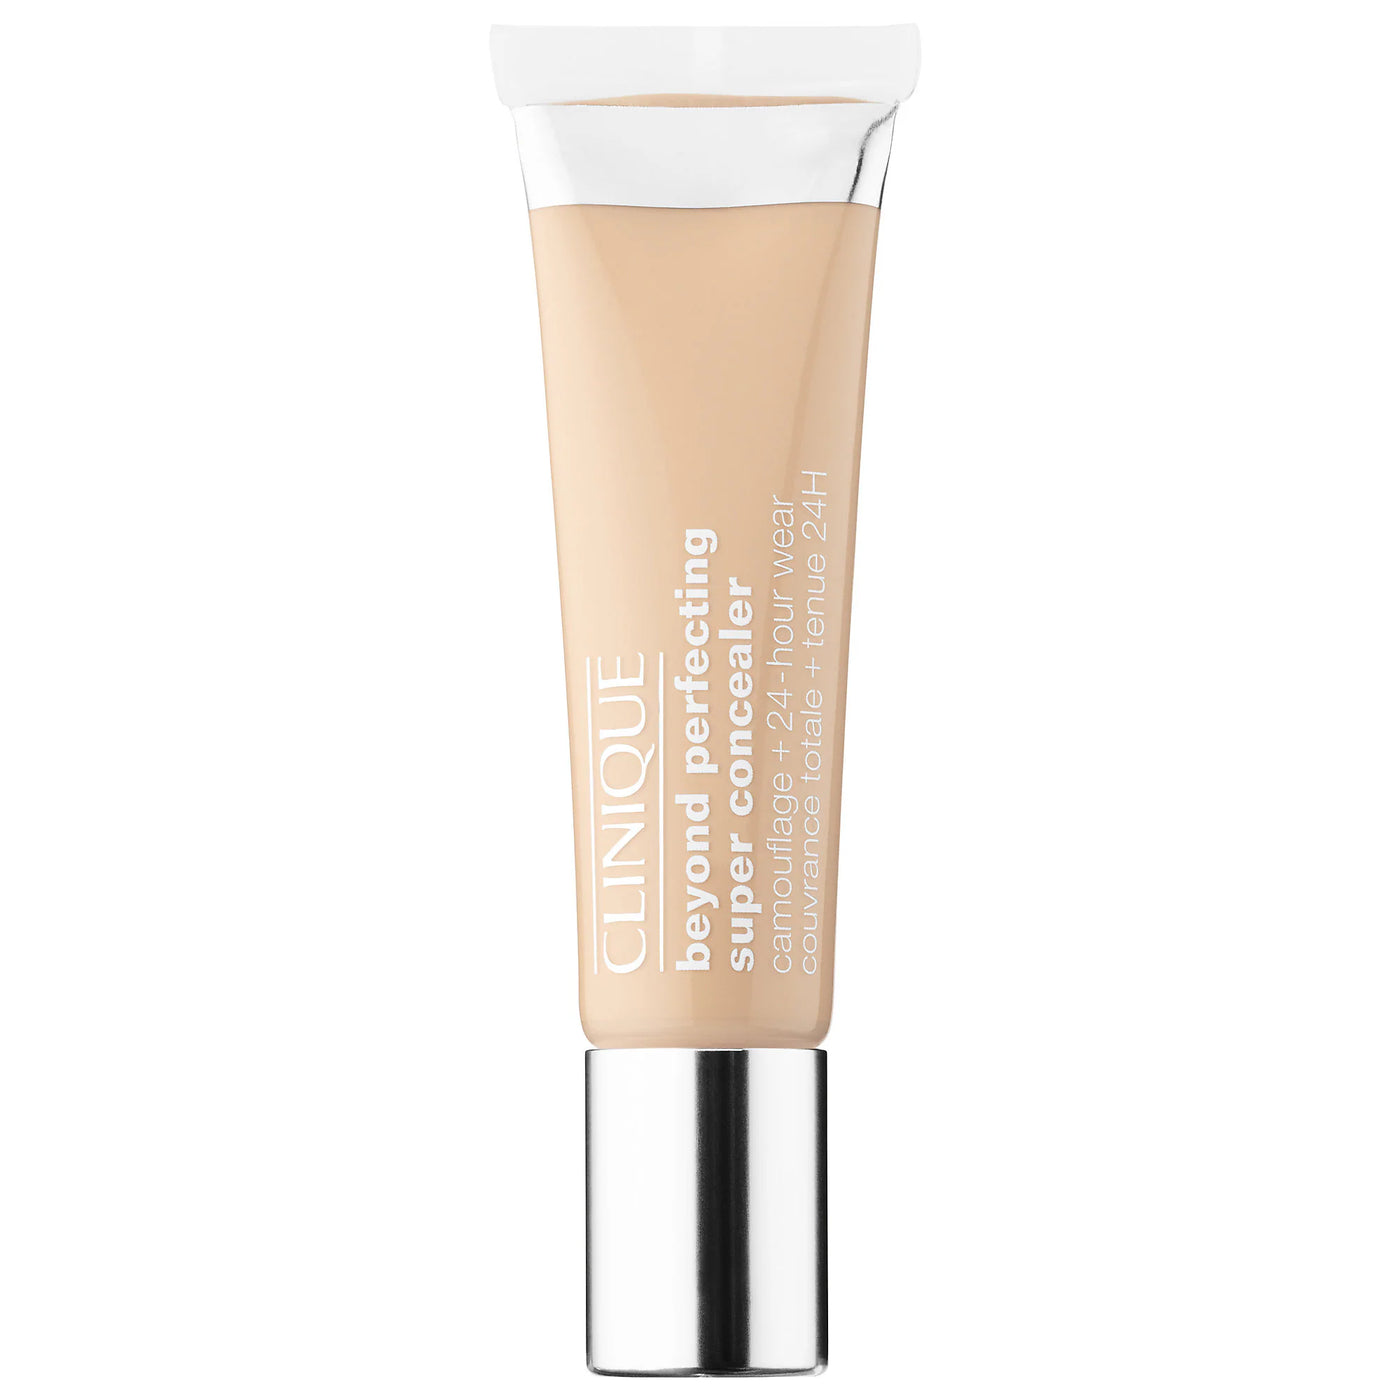 CLINIQUE BEYOND PERFECTING SUPER CONCEALER tester 8g